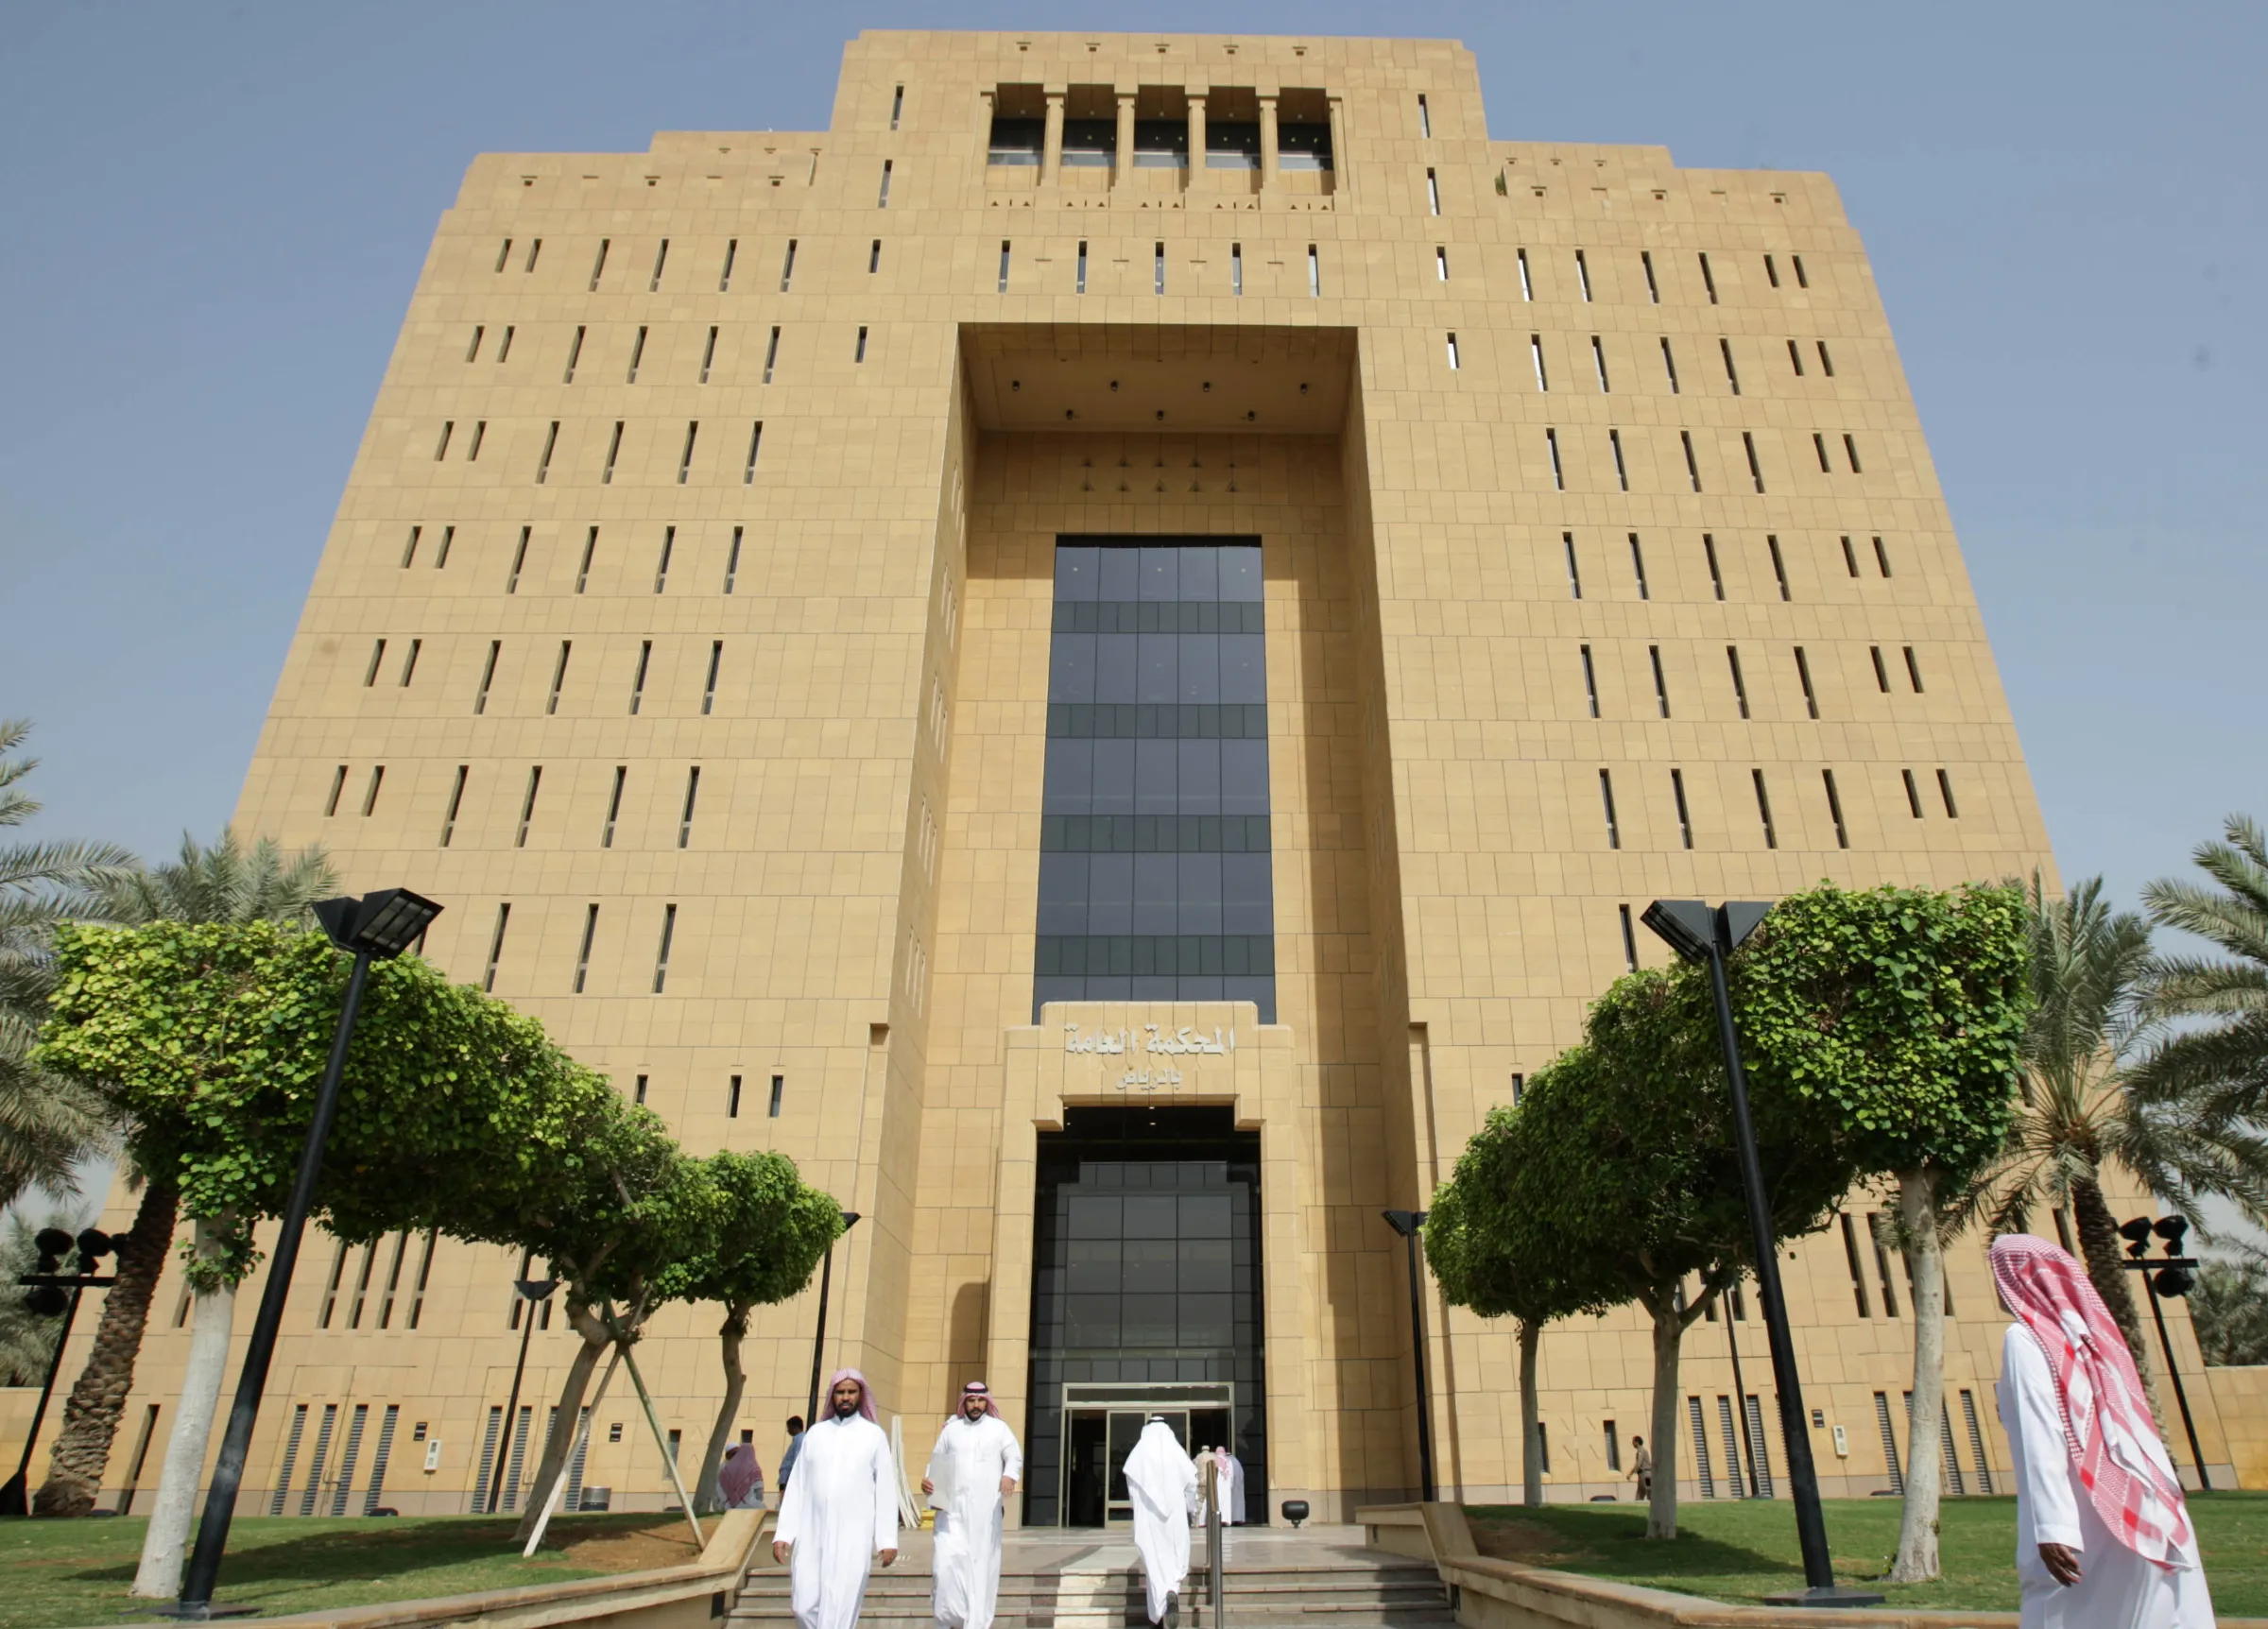 People enter and leave Riyadh's general court